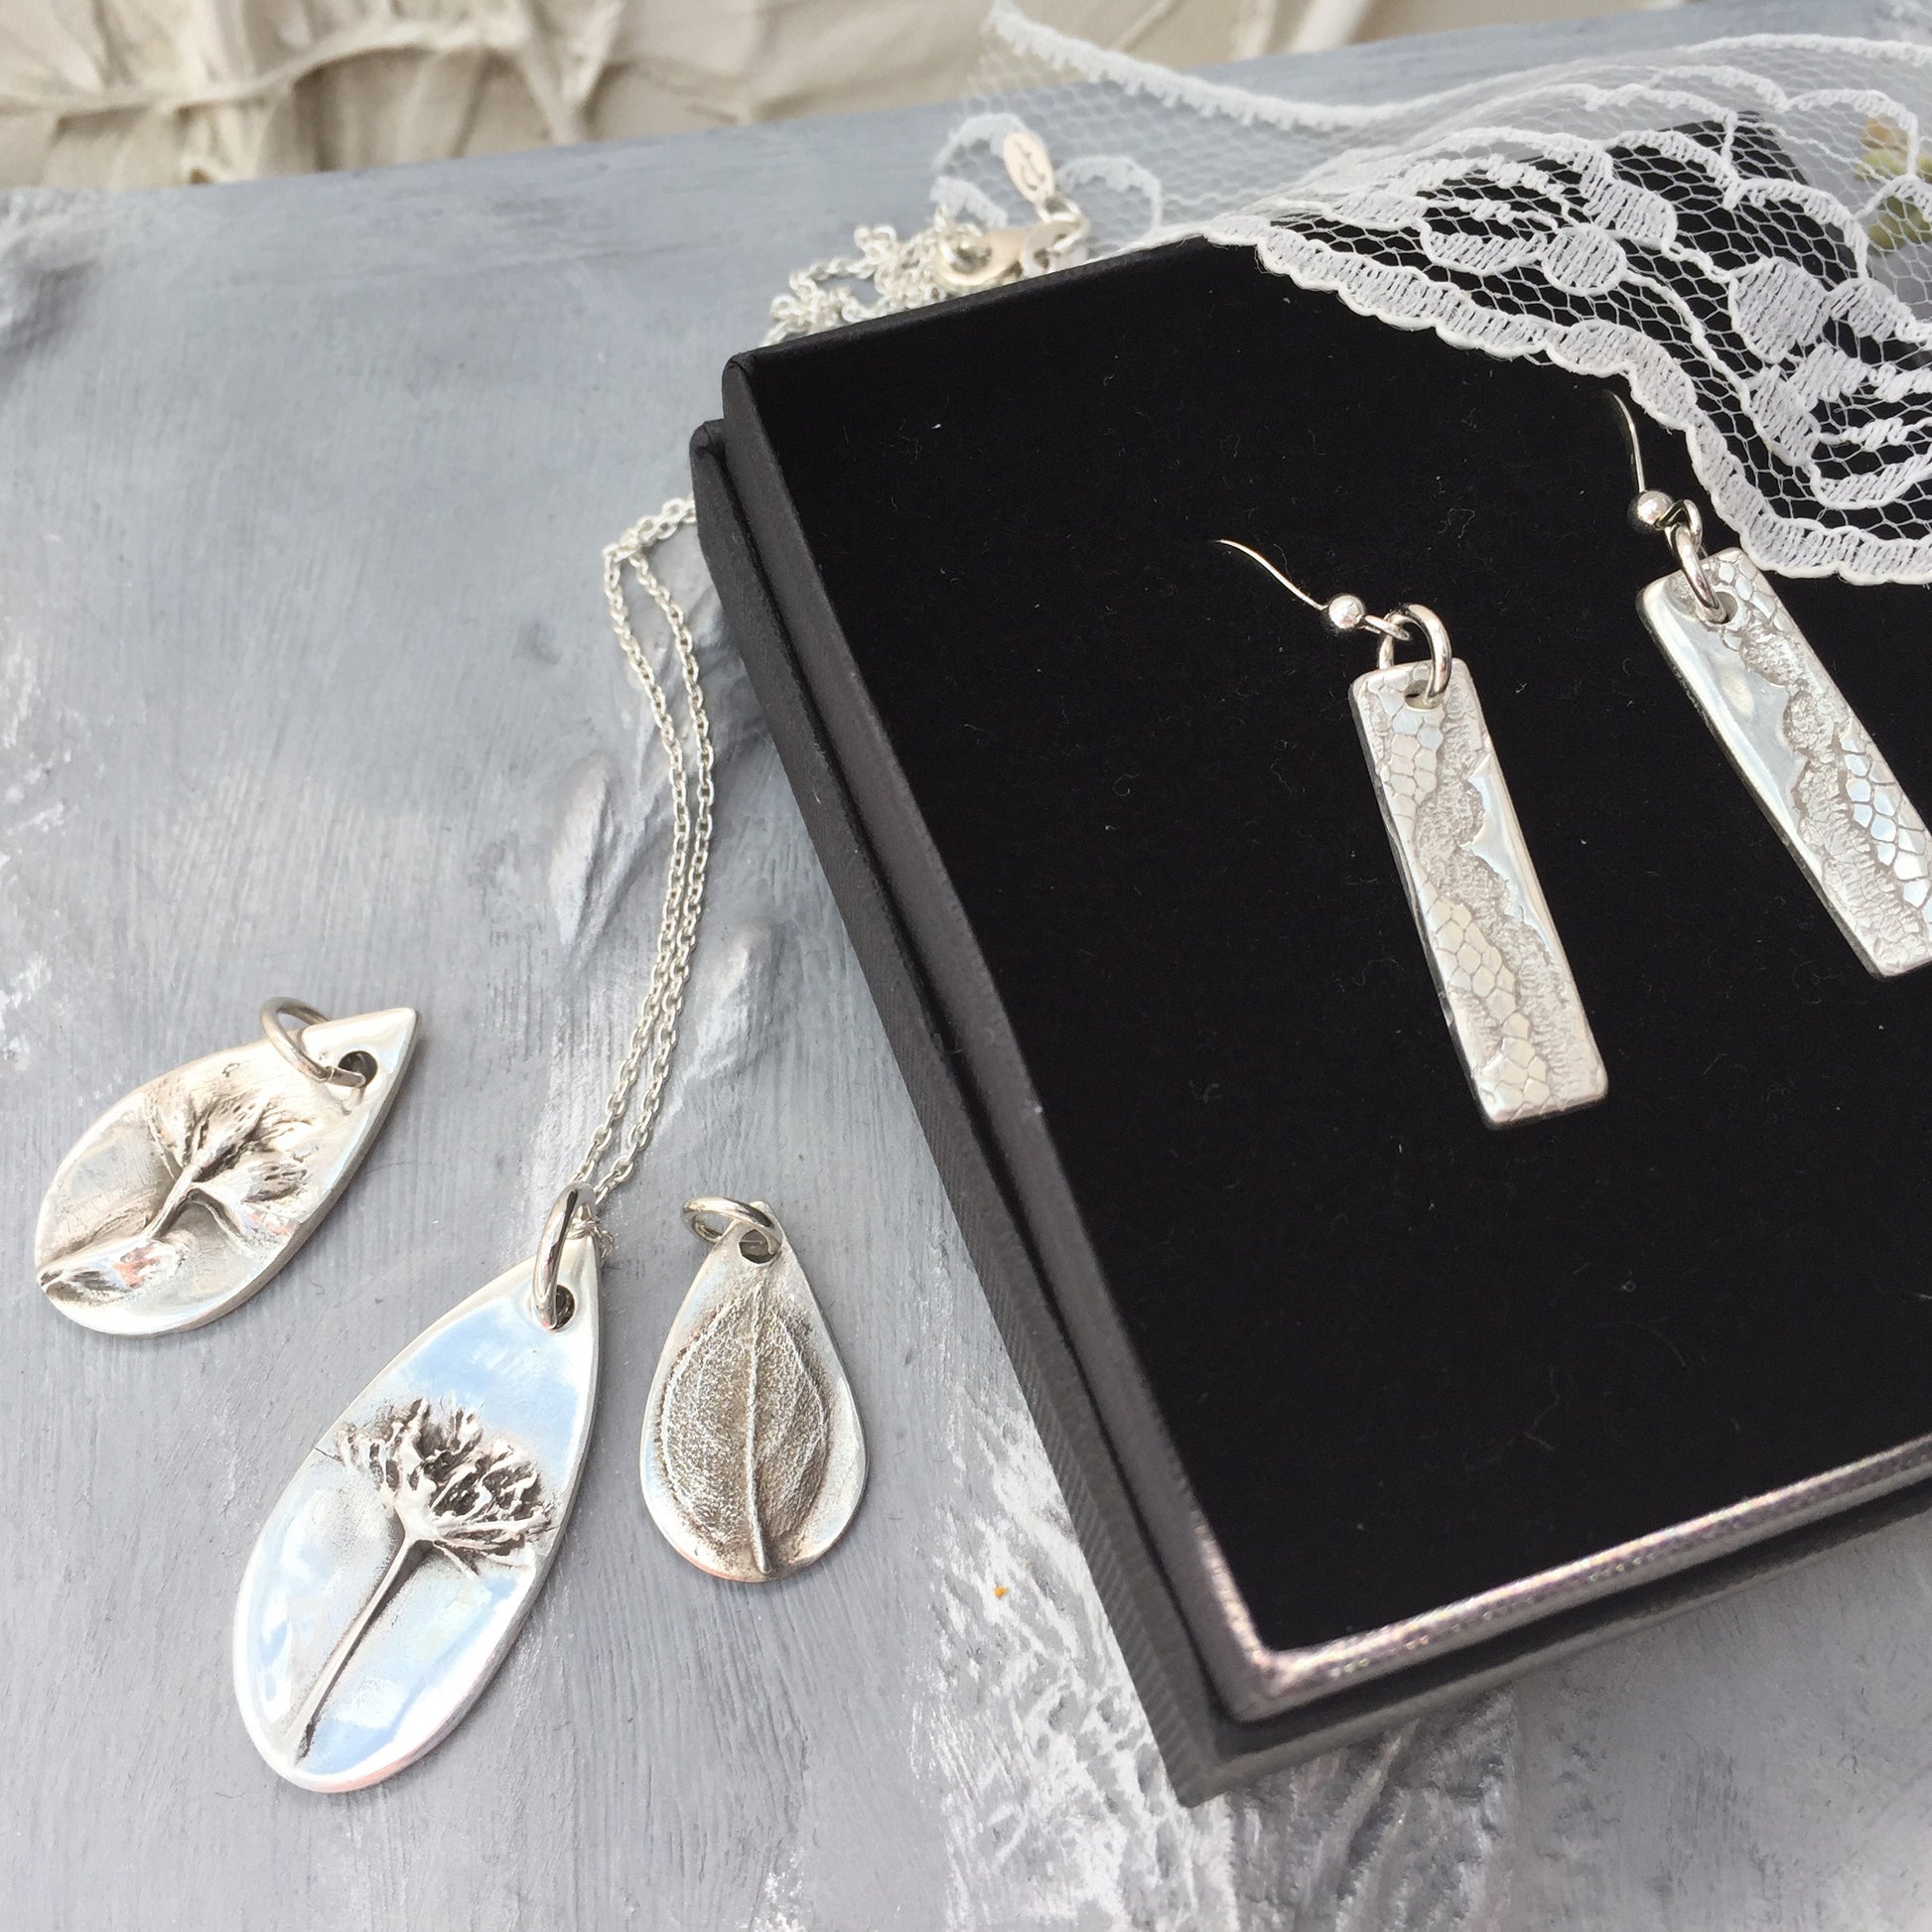 Learn The Basics – Beginners Silver Art Clay 1st February 2019 10am-2.30pm - SOLD OUT - Joy Impressions